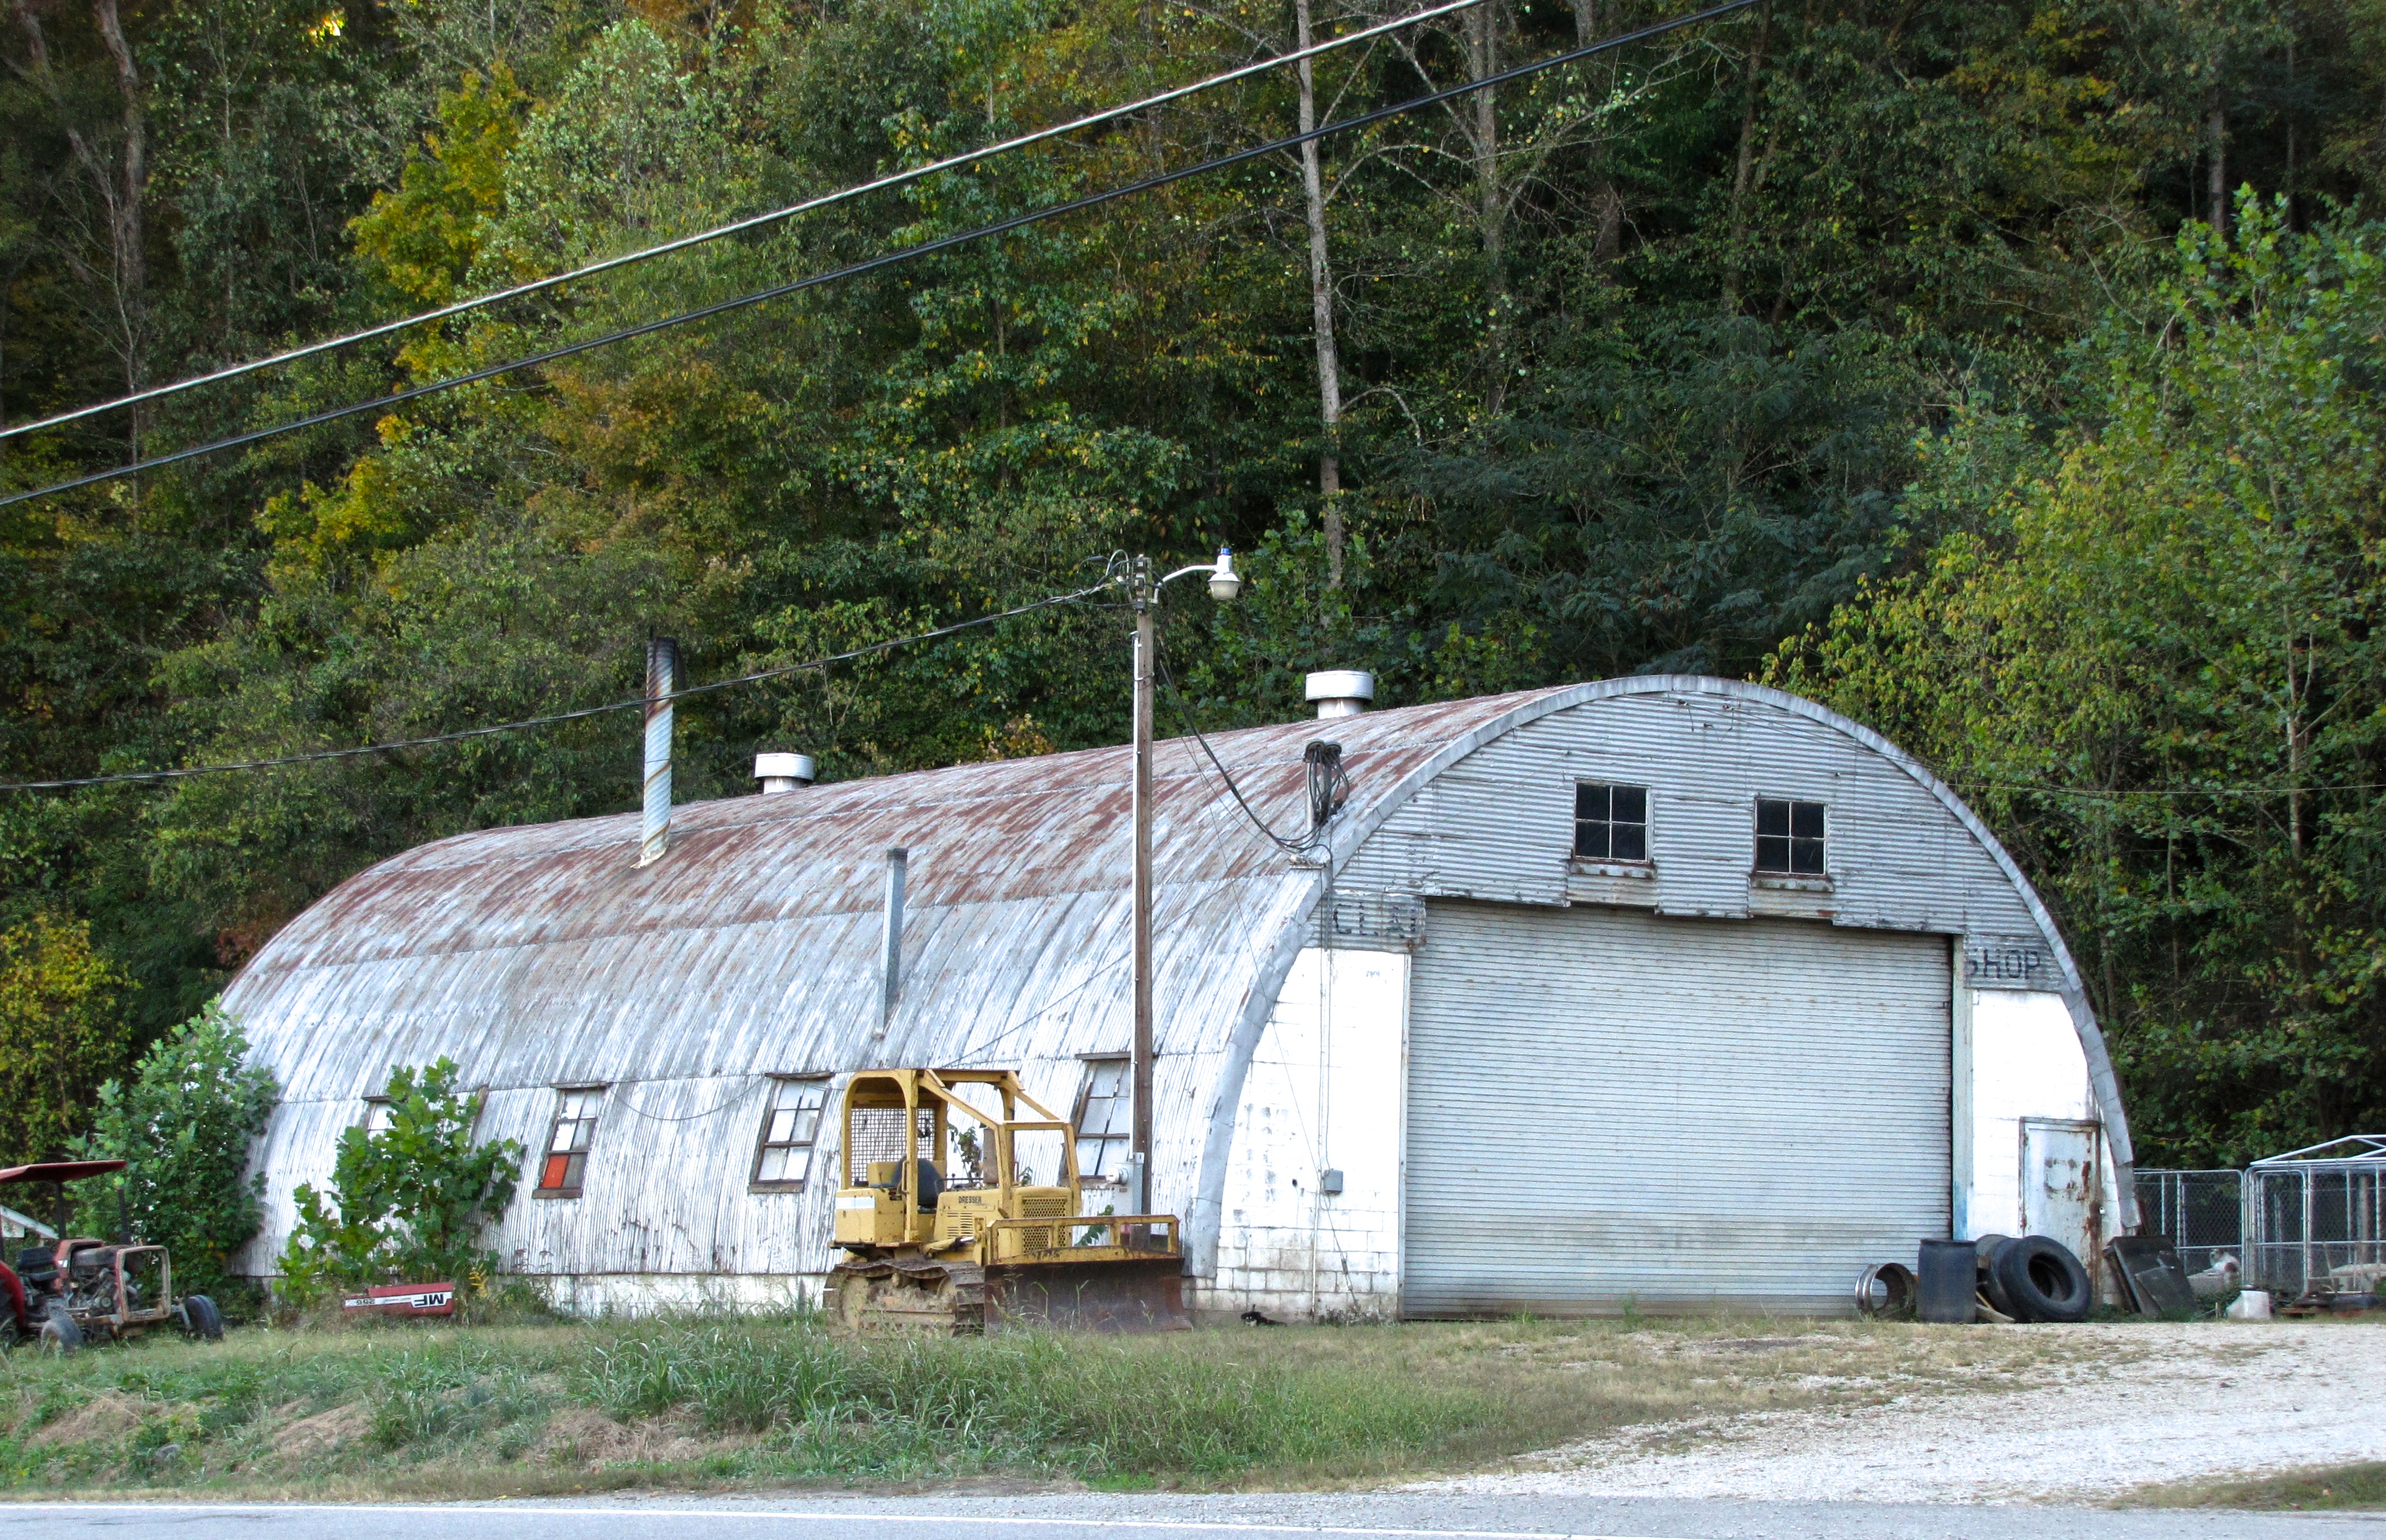 quonset hut in Big Spring, TX